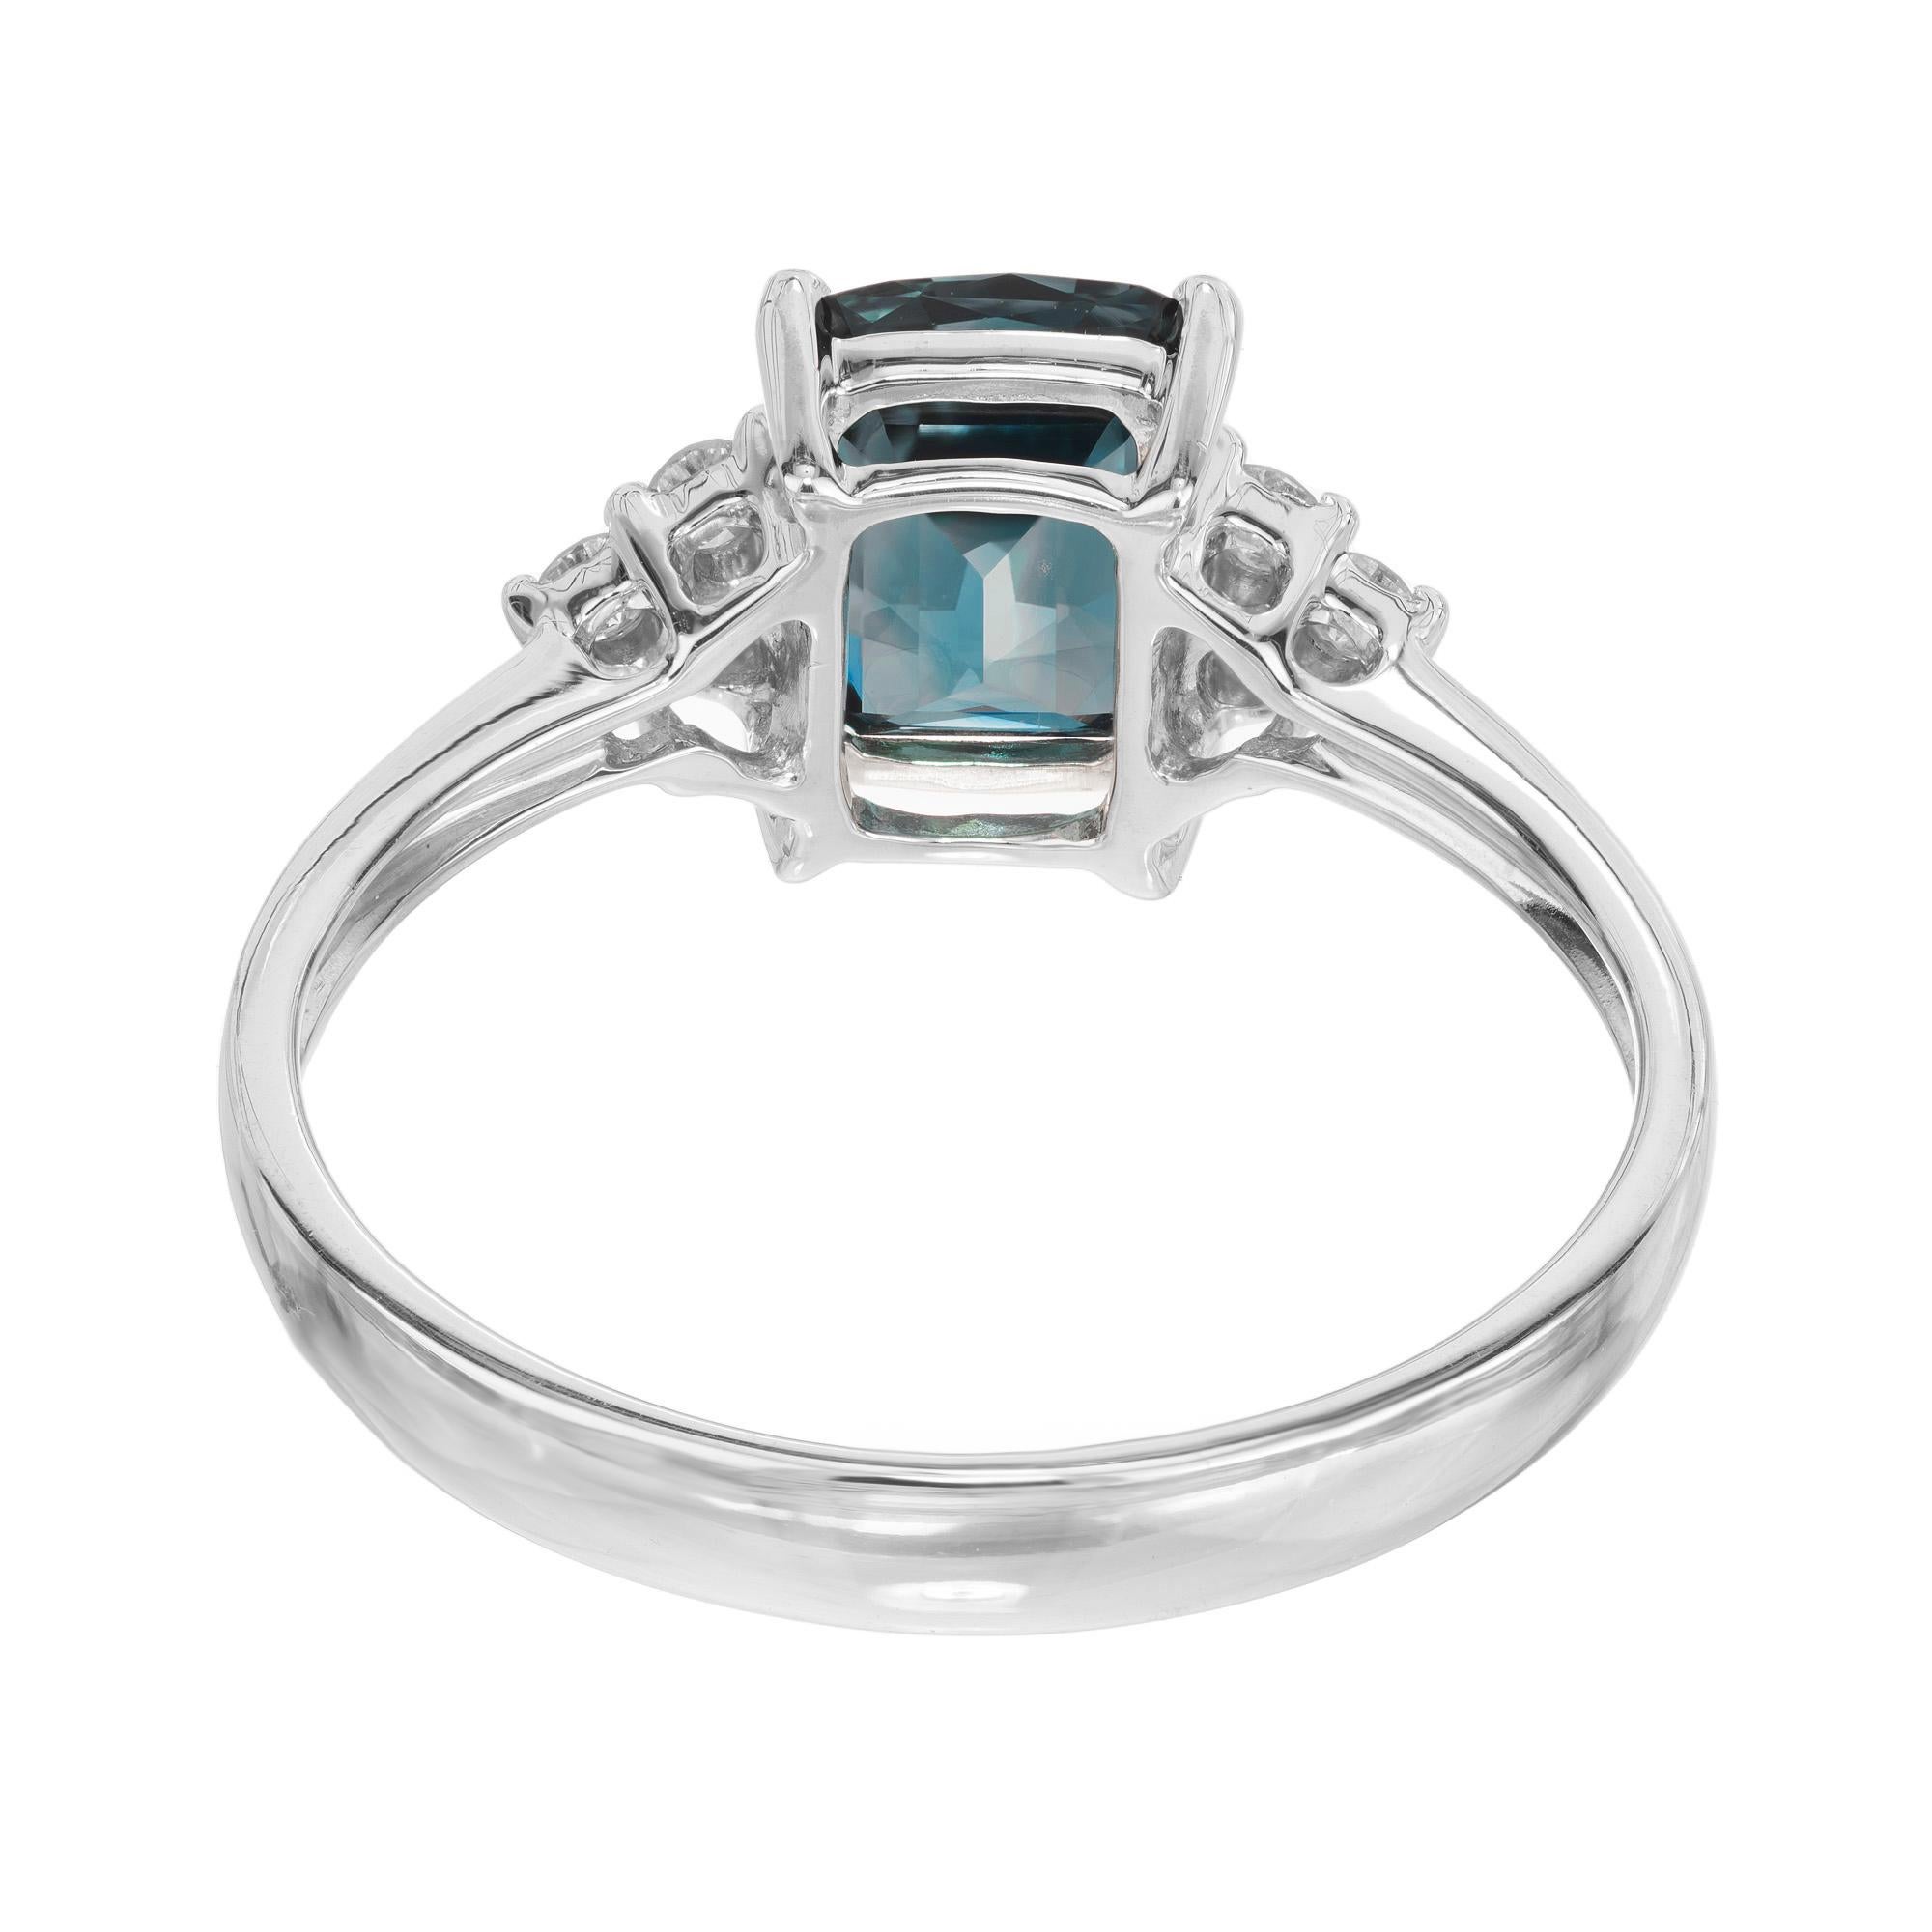 This stunning ring features a dazzling 1.30 carat cushion cut green blue sapphire center stone that captures the light with unparalleled brilliance. Surrounding the sapphire are 6 round brilliant cut accent diamonds set in a 18k white gold setting.